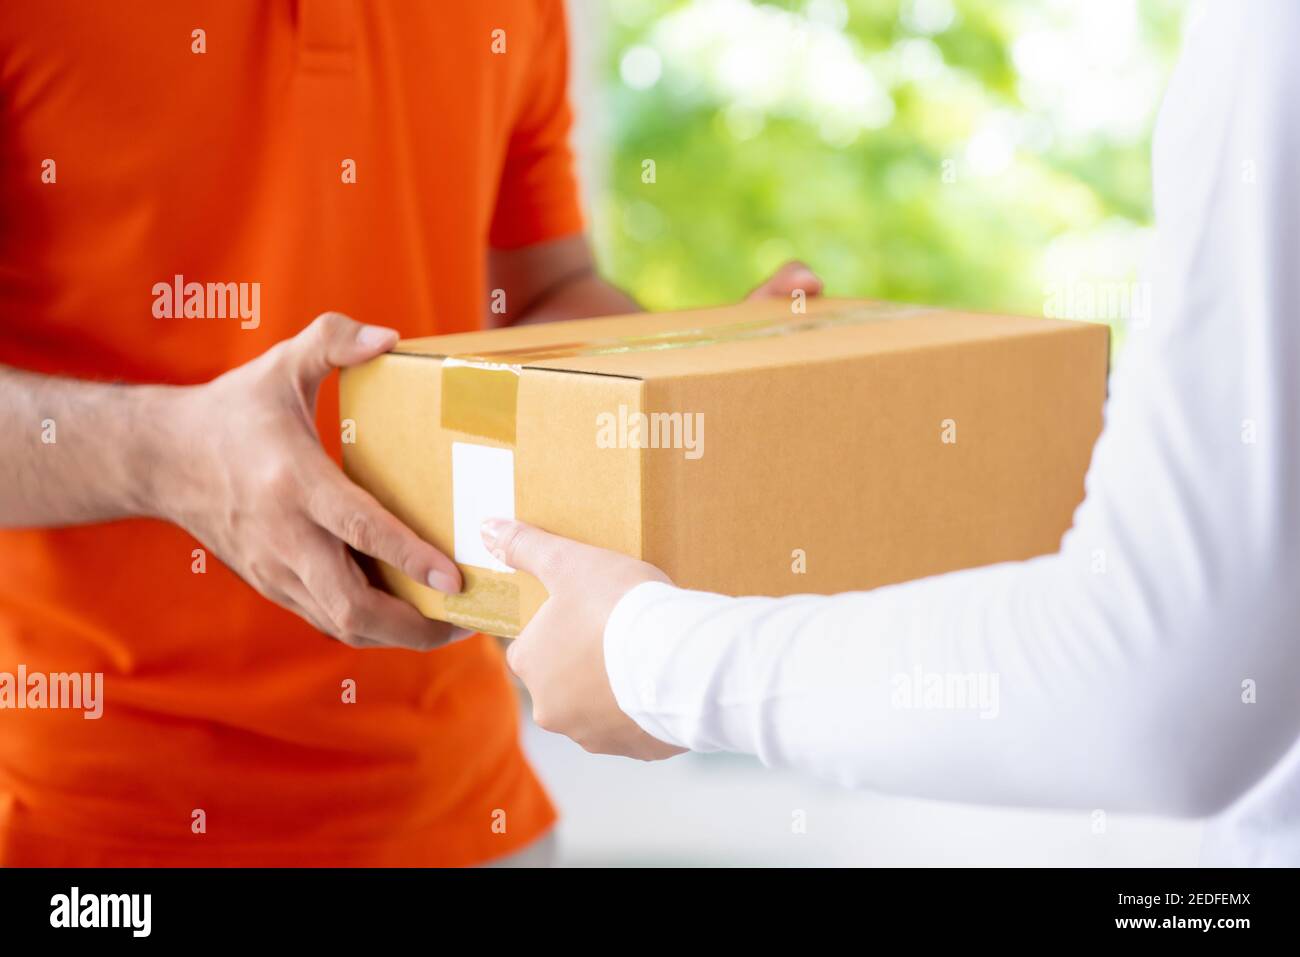 Courier service delivery man in orange uniform giving parcel box to customer at home Stock Photo